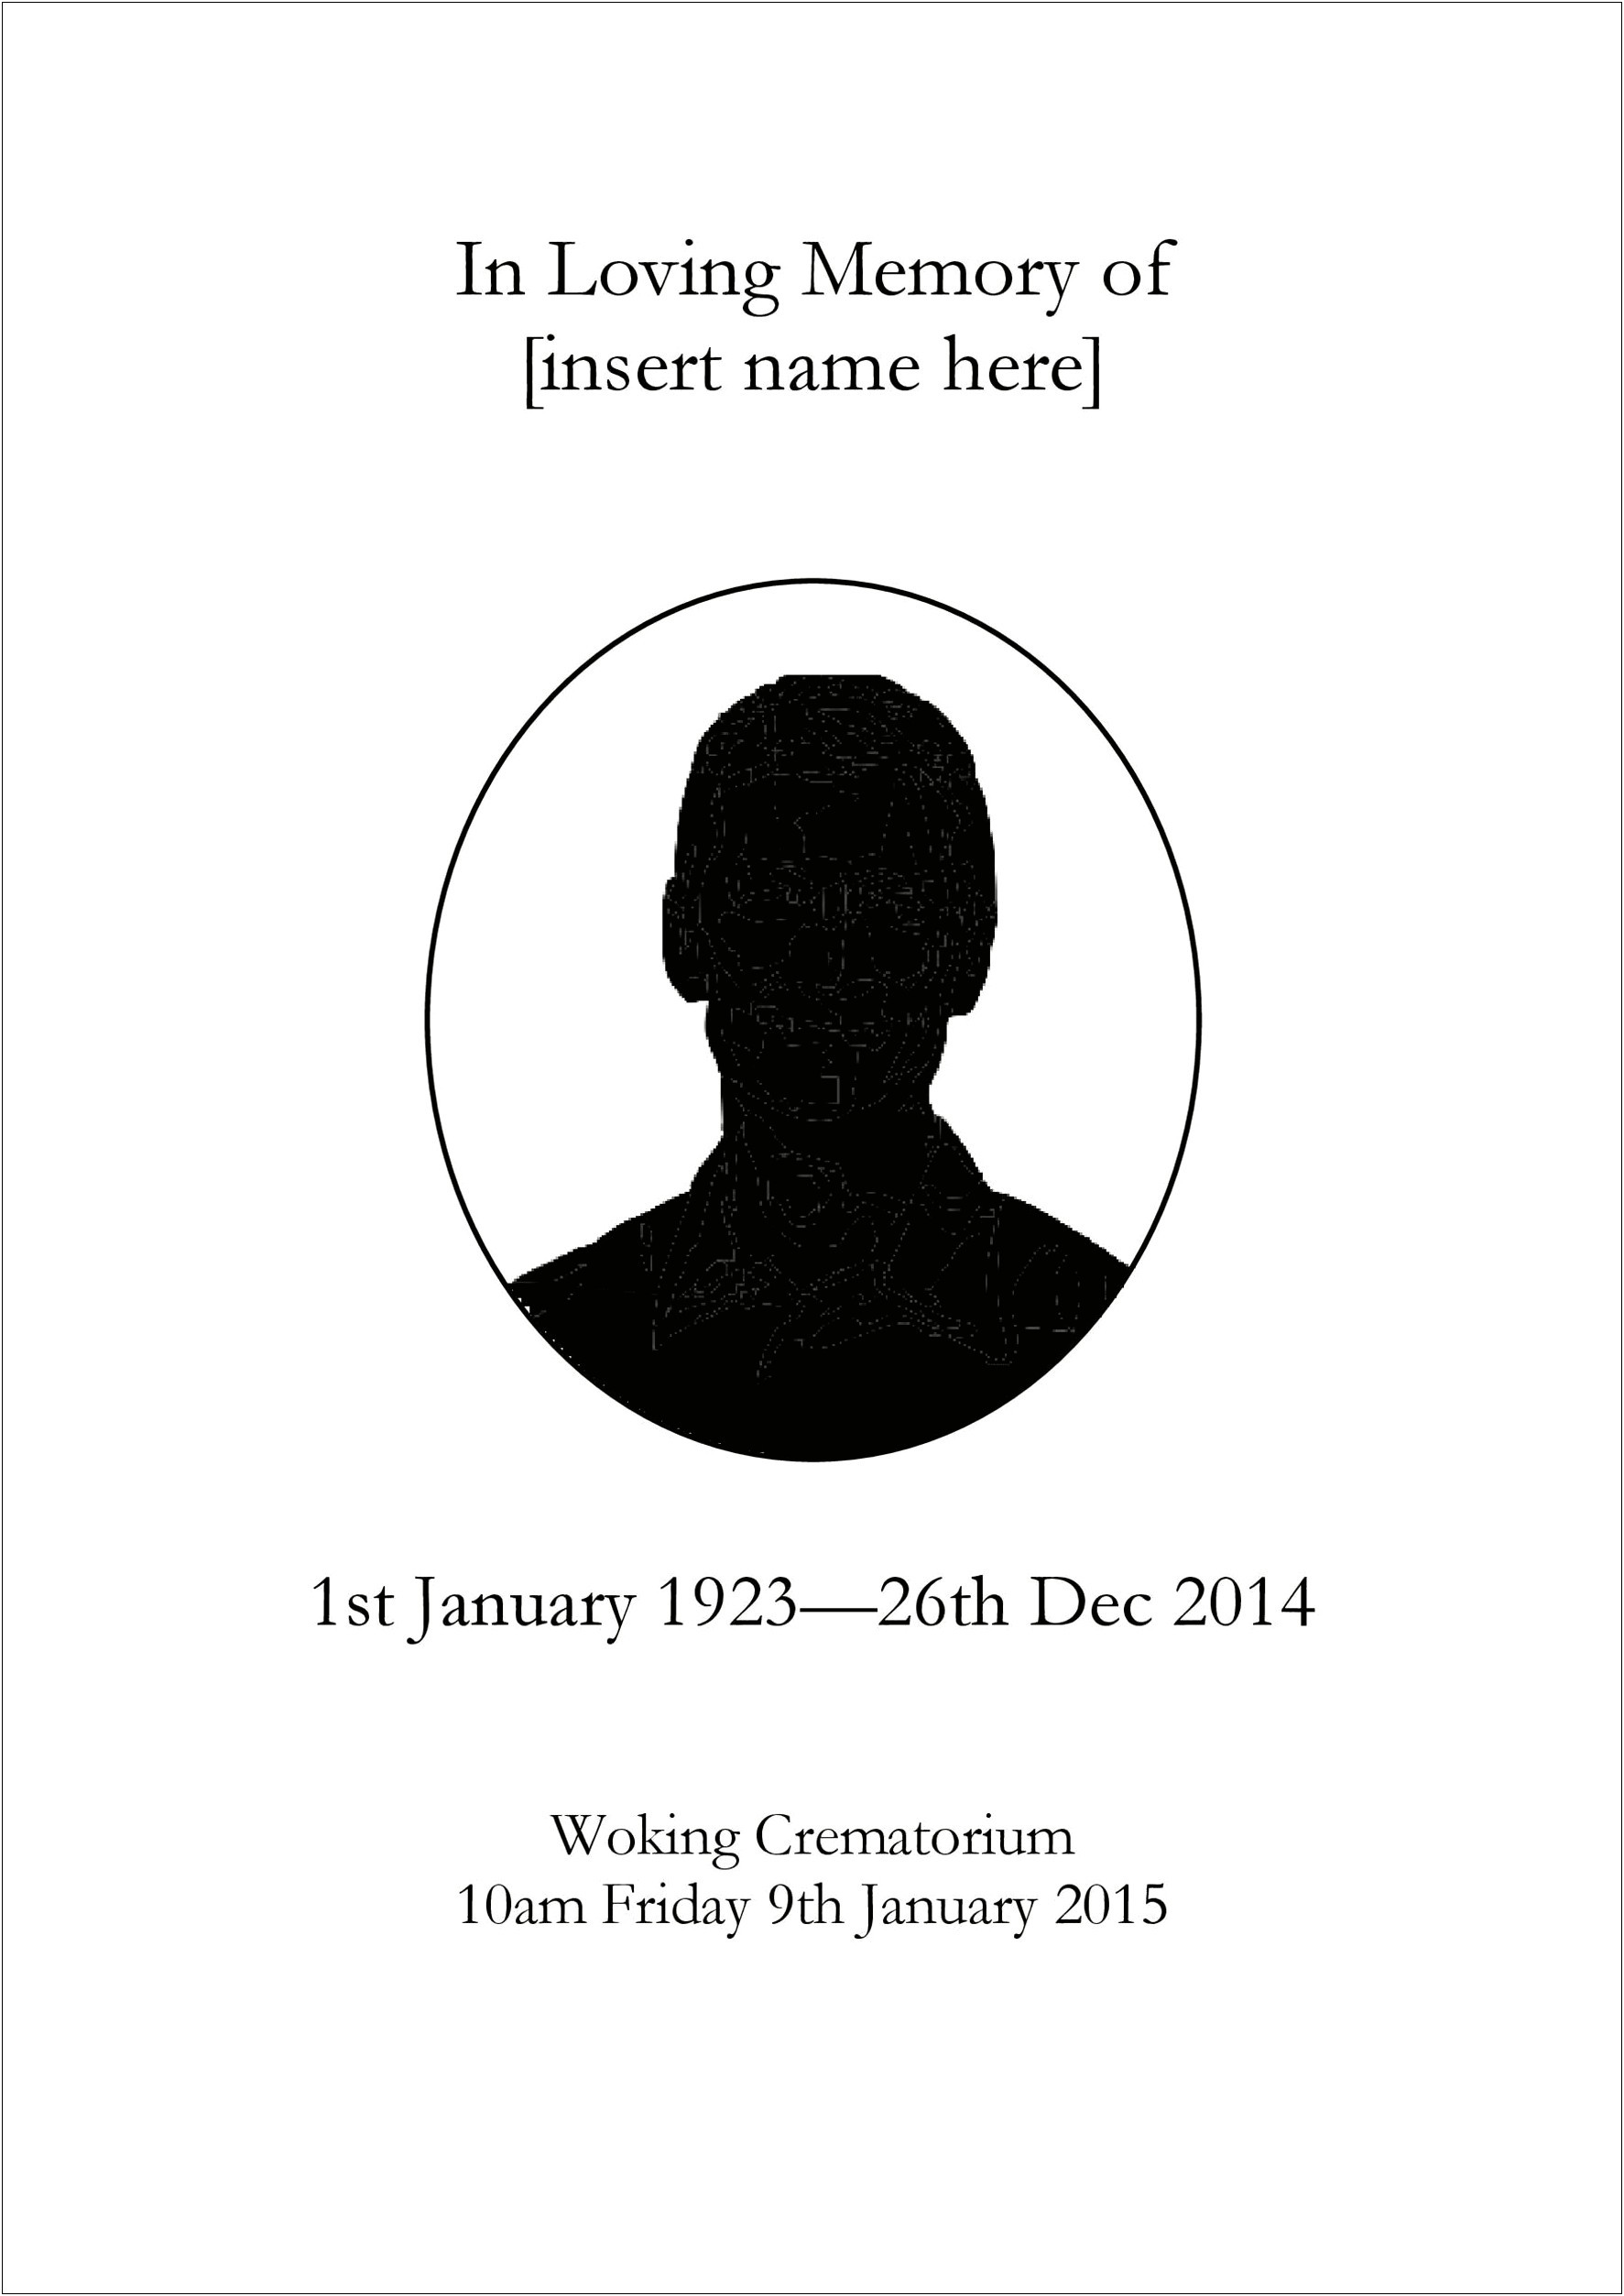 Funeral Prayer Card Template For Word Free